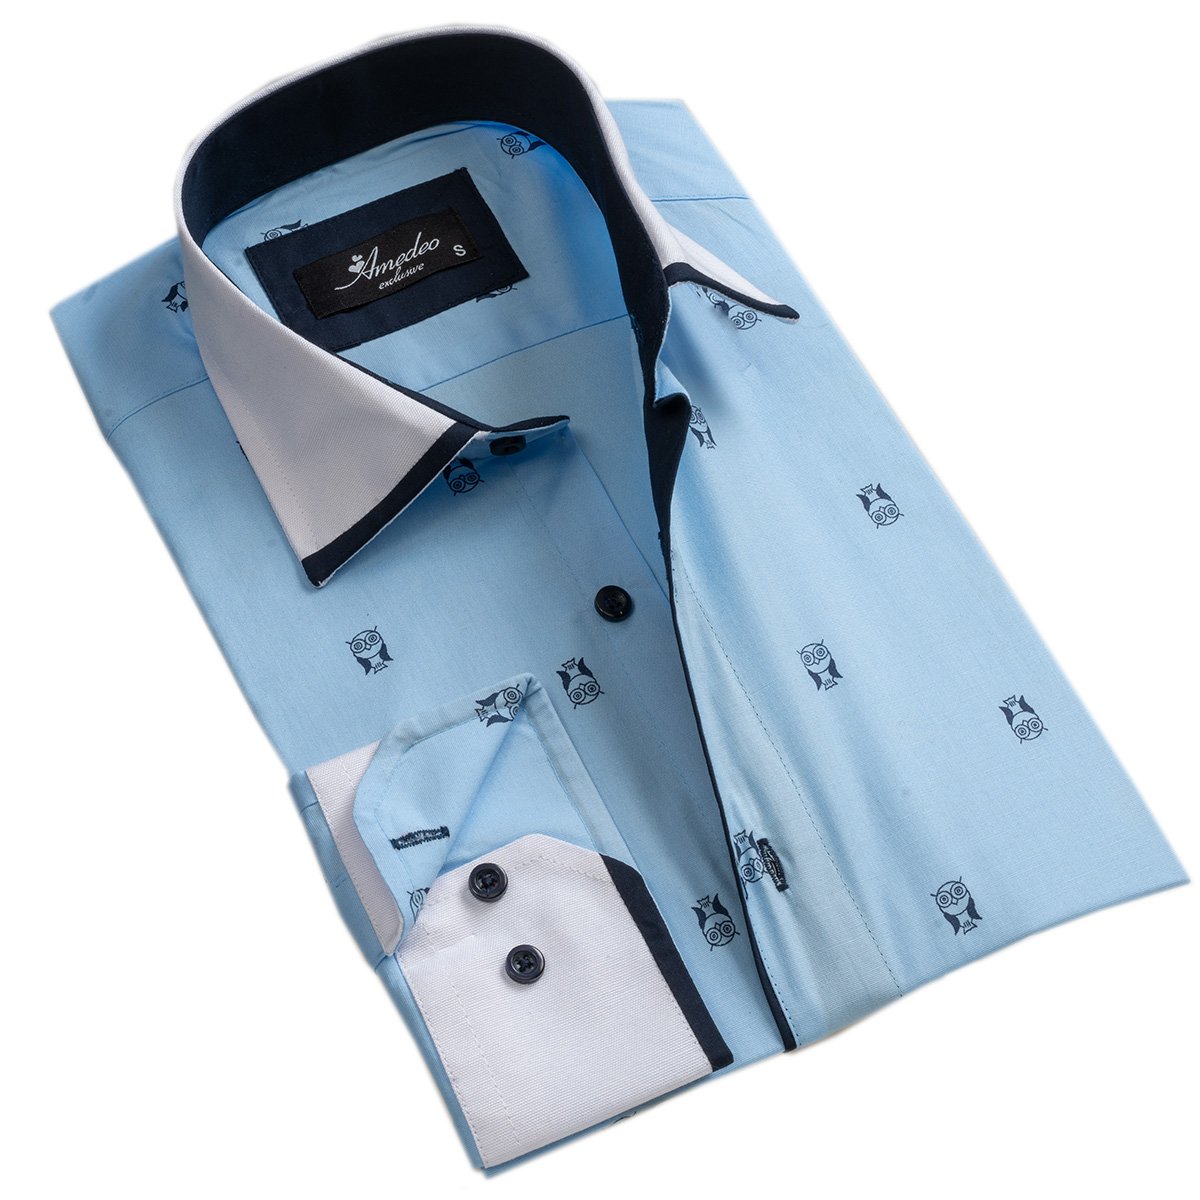 Light Blue w/ Navy Blue Mens Slim Fit Designer Dress Shirt - tailored Cotton Shirts for Work and - Amedeo Exclusive